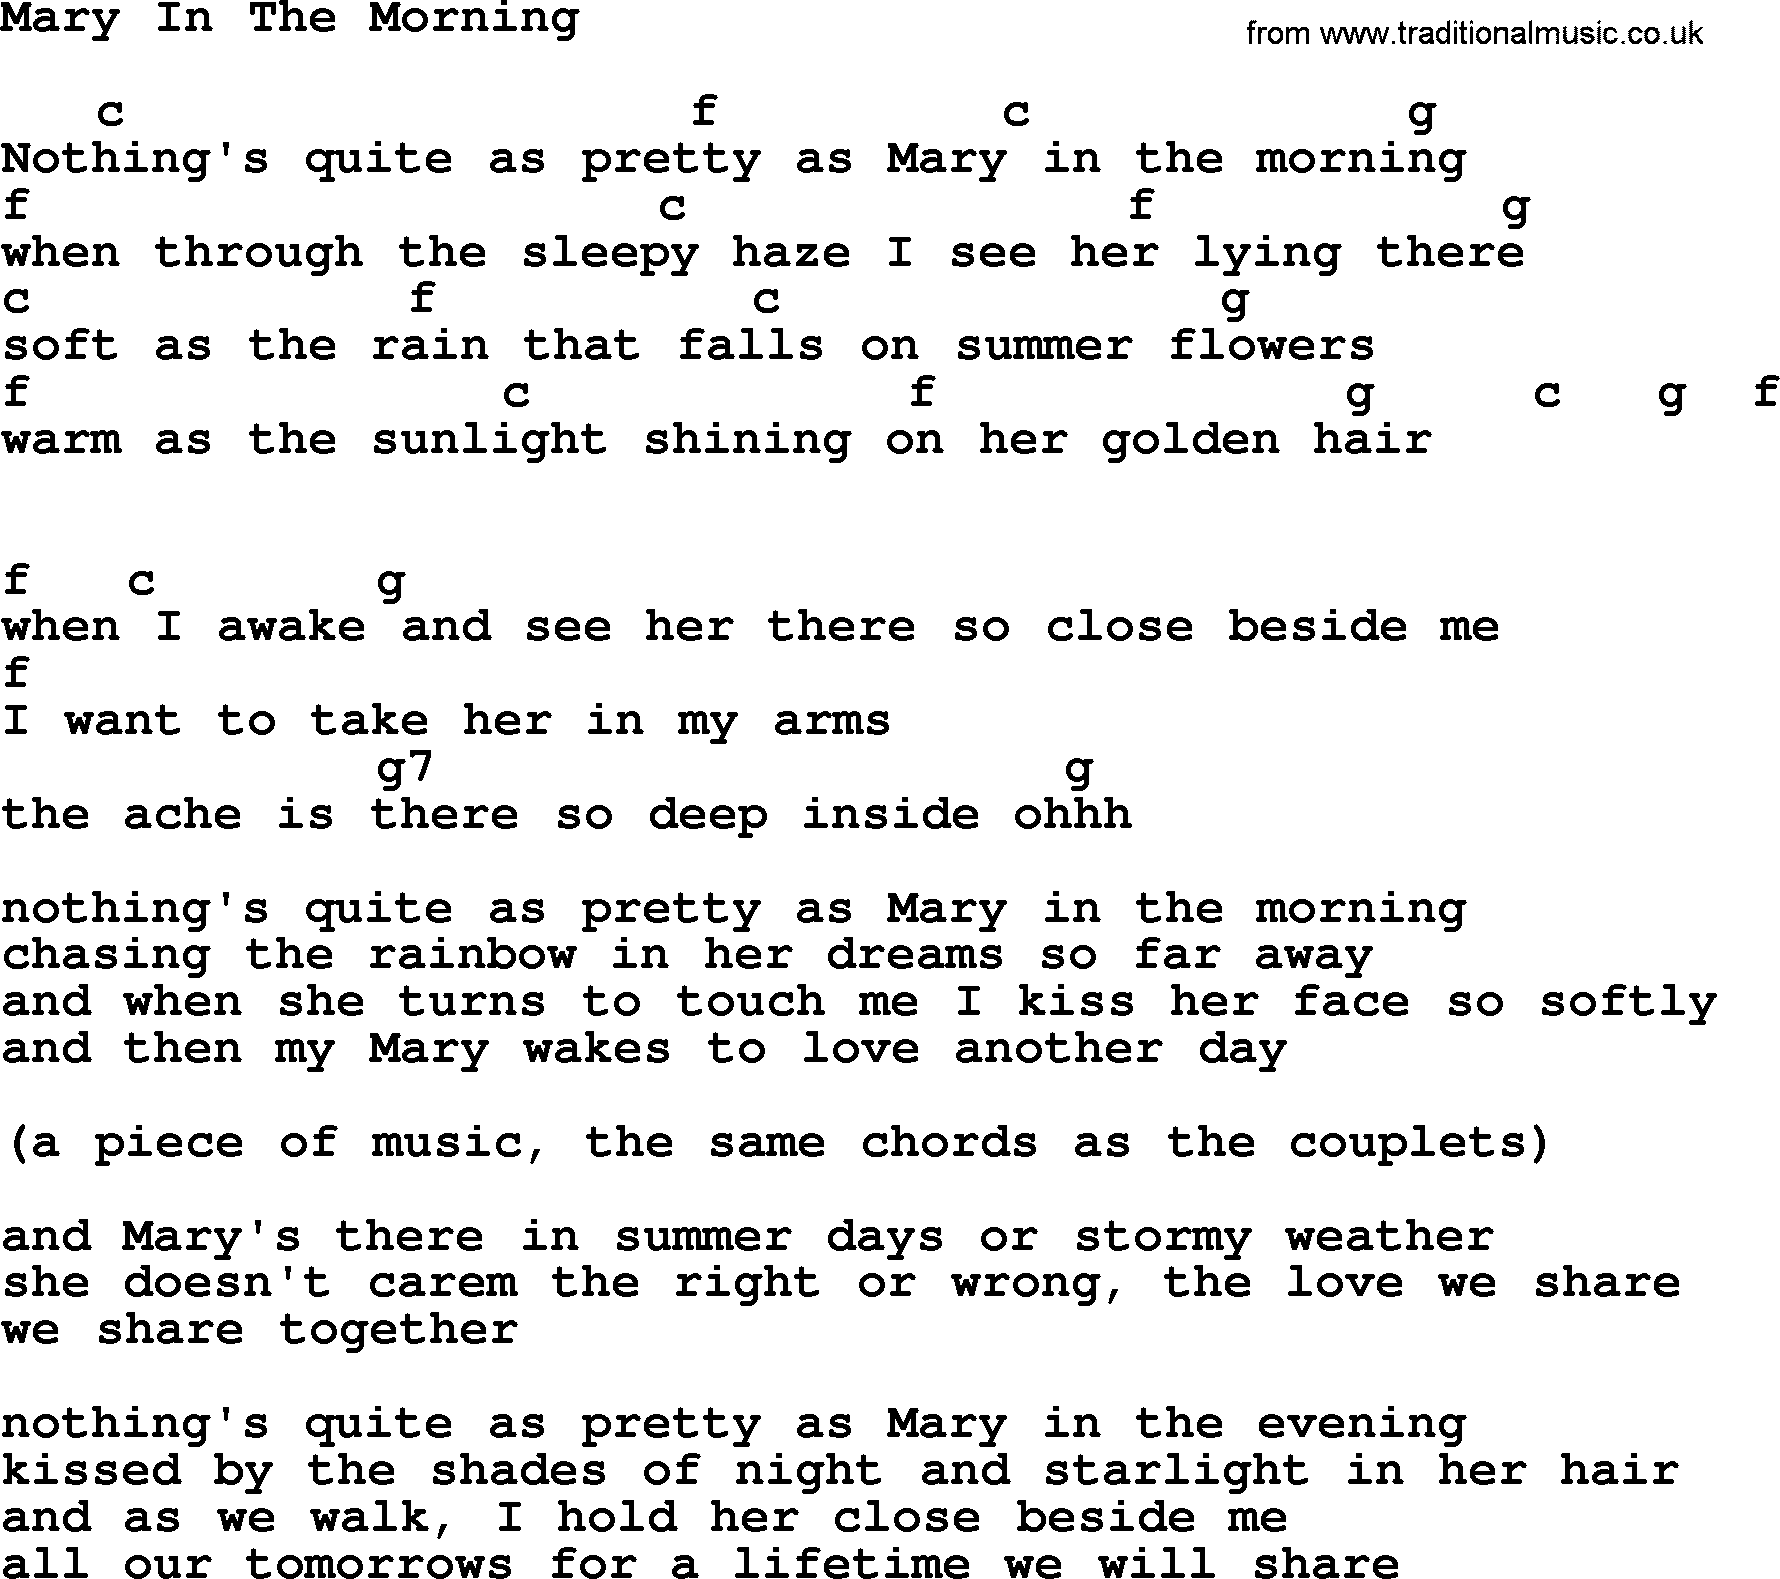 Mary In The Morning, by Elvis Presley - lyrics and chords